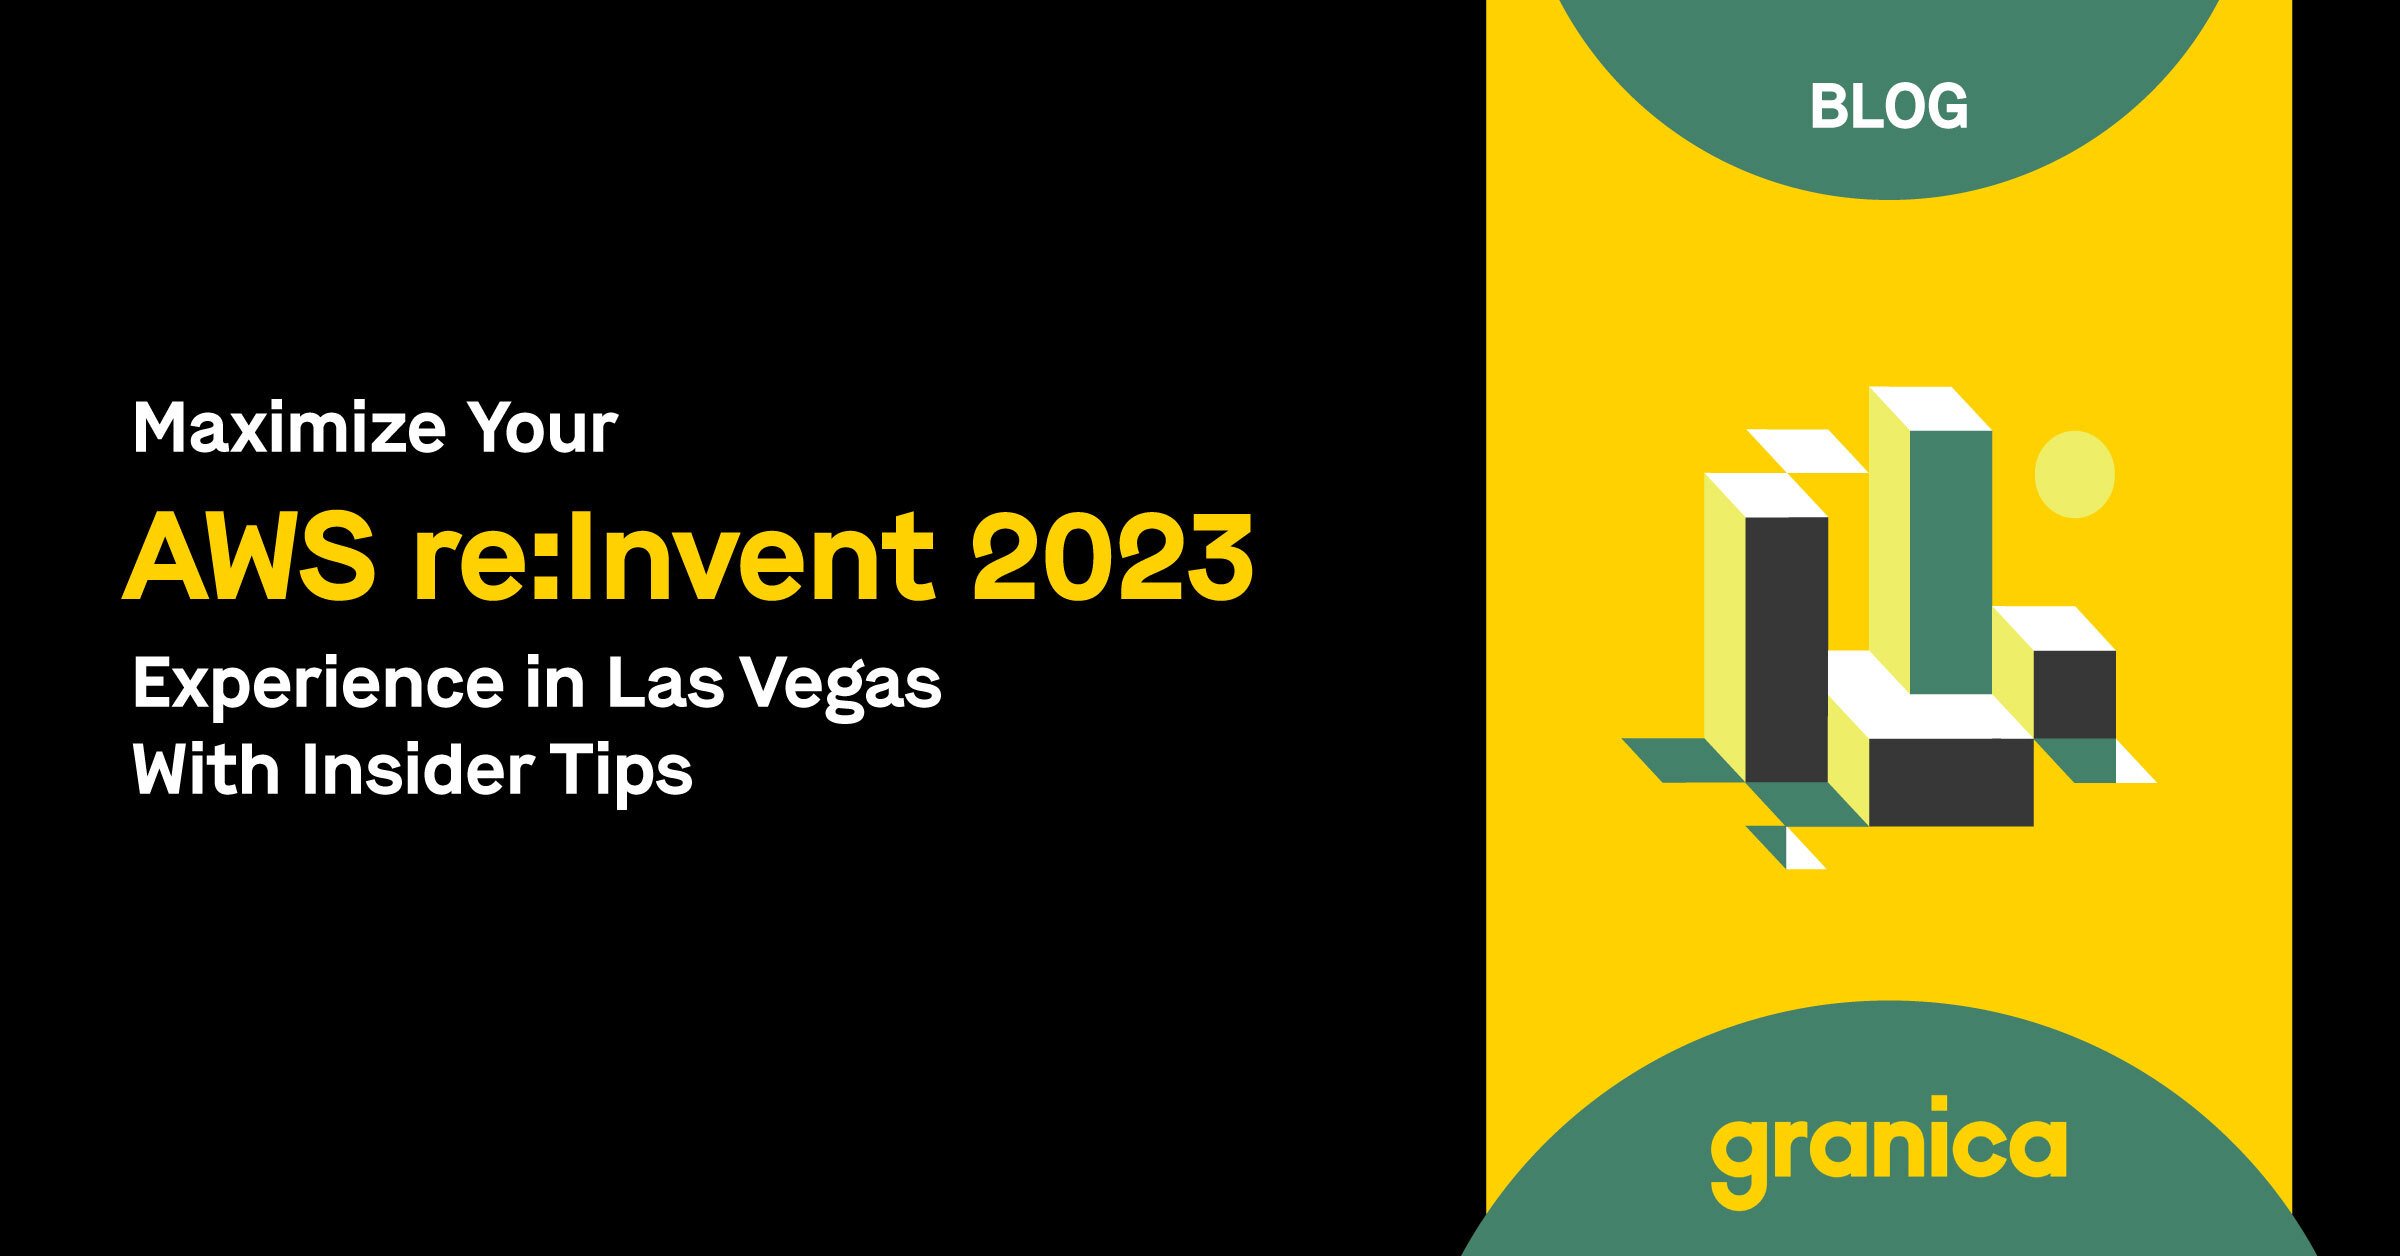 Maximize Your AWS re:Invent 2023 Experience in Vegas with Insider Tips